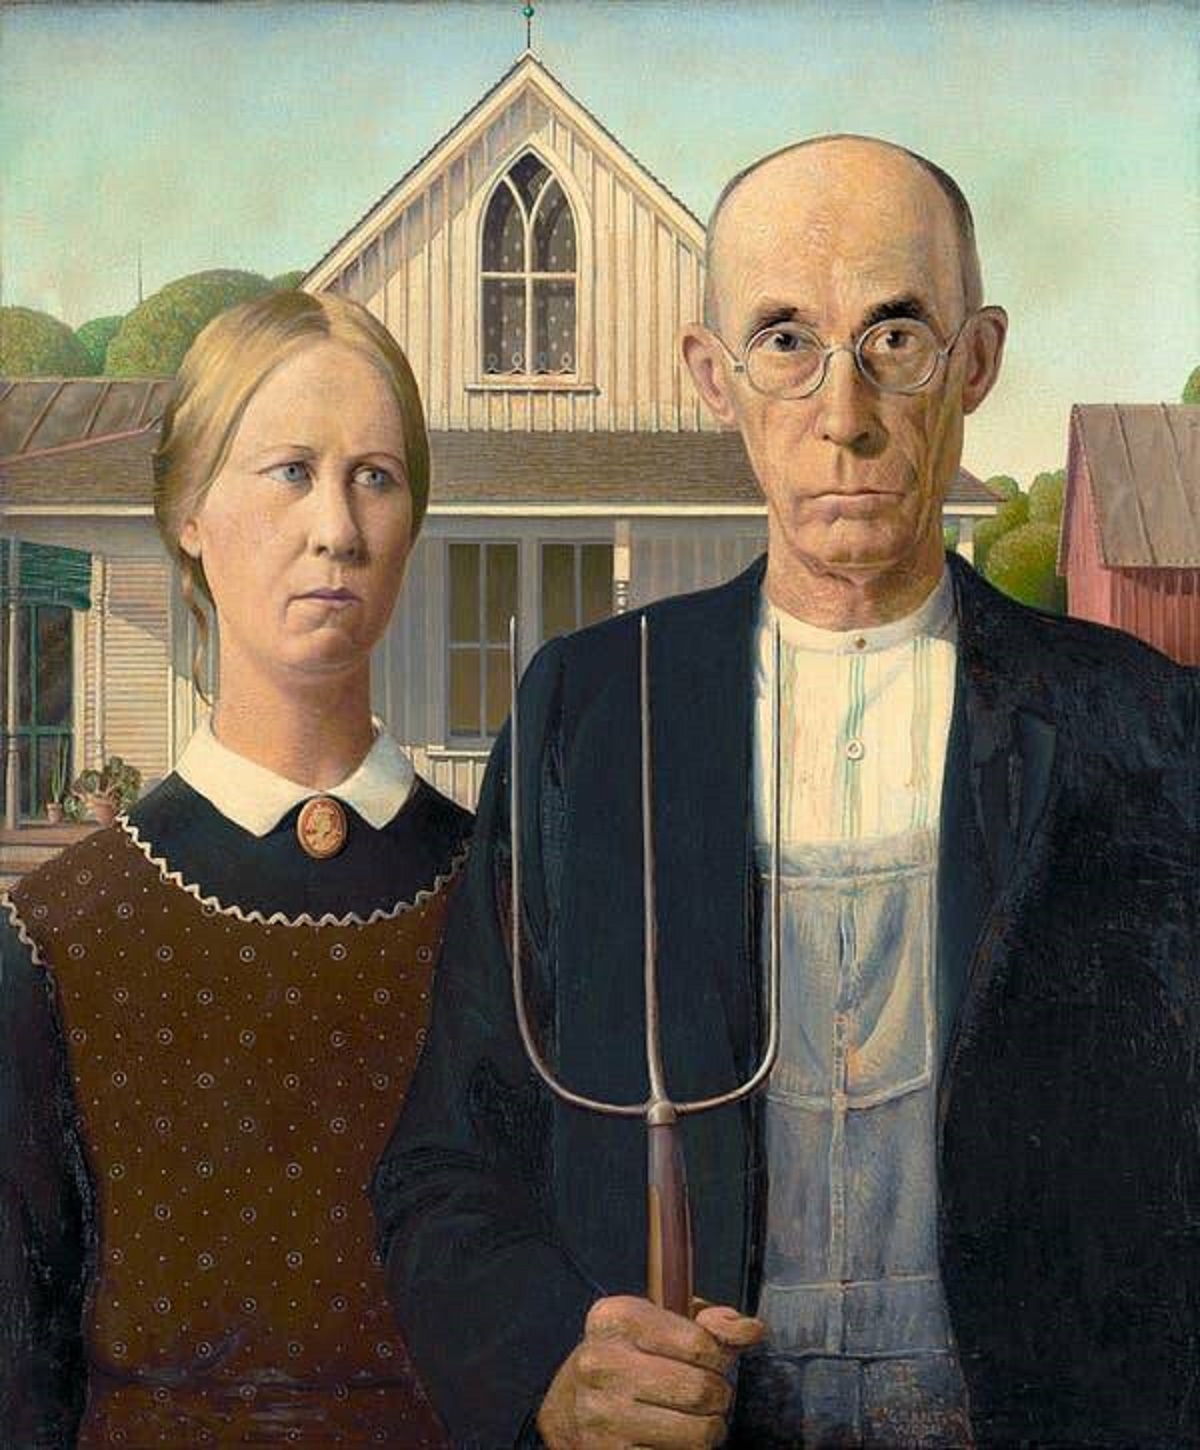 You are, of course, familiar with Grant Wood's painting "American Gothic"...